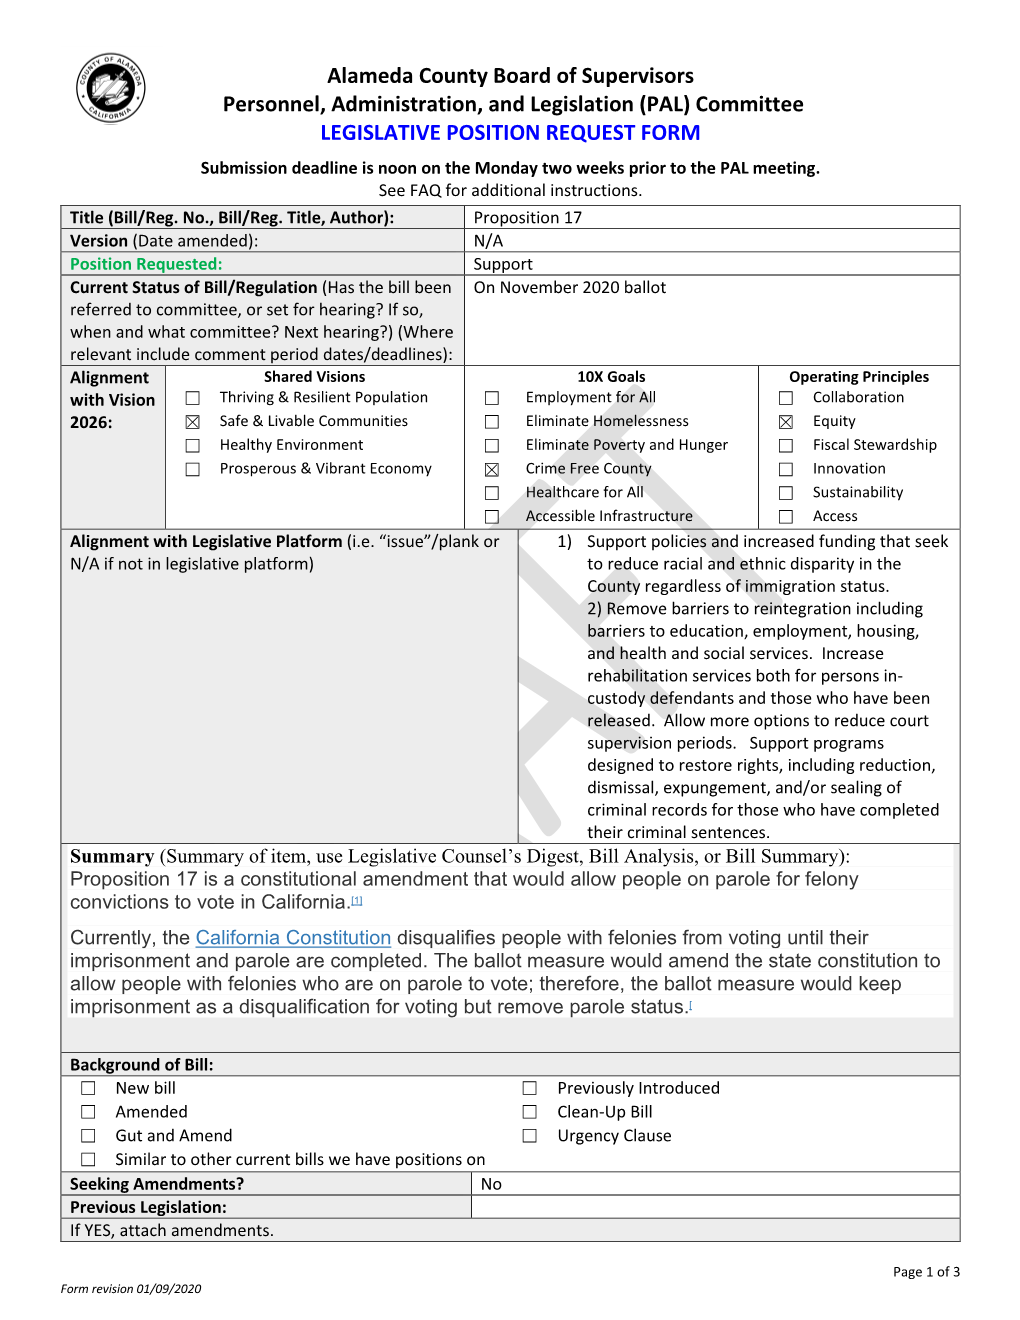 Alameda County Board of Supervisors Personnel, Administration, and Legislation (PAL) Committee LEGISLATIVE POSITION REQUEST FORM